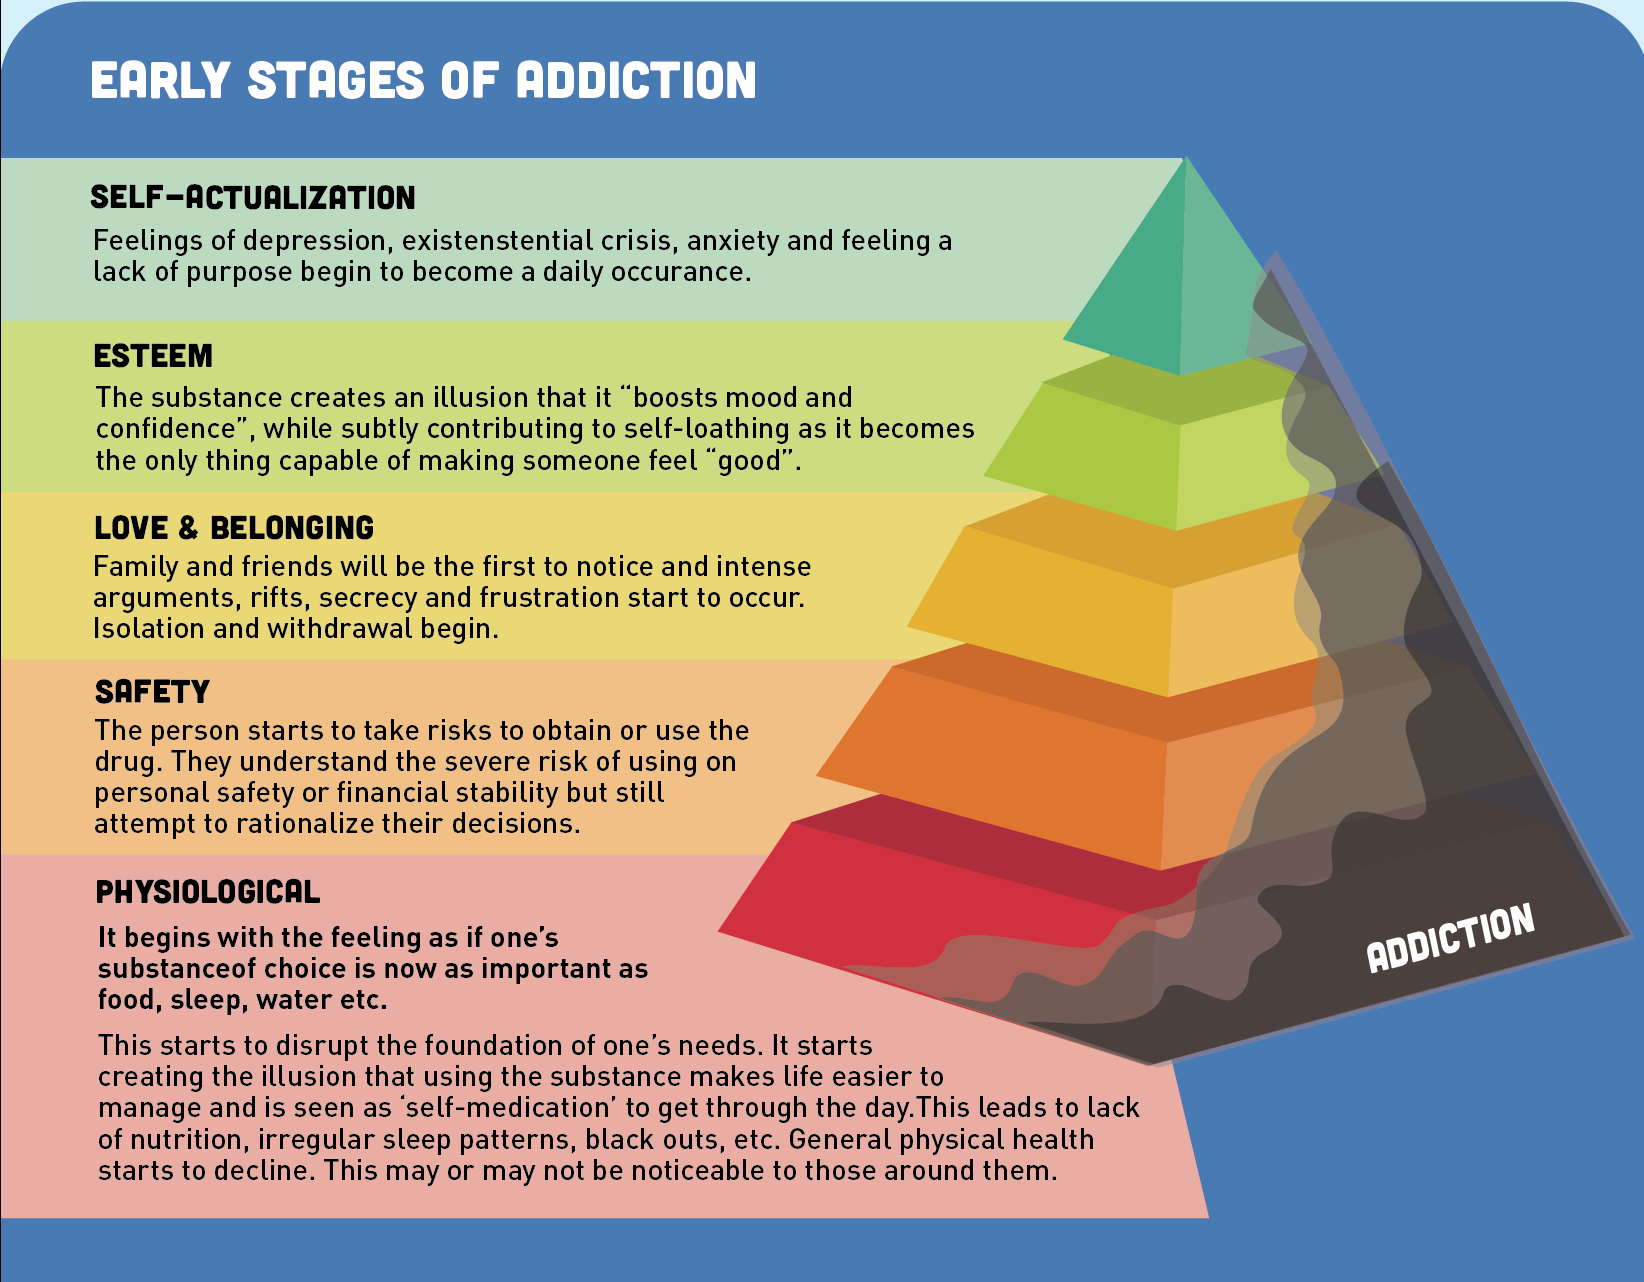 Maslow's Hierarchy of Needs pyramid in early addiction